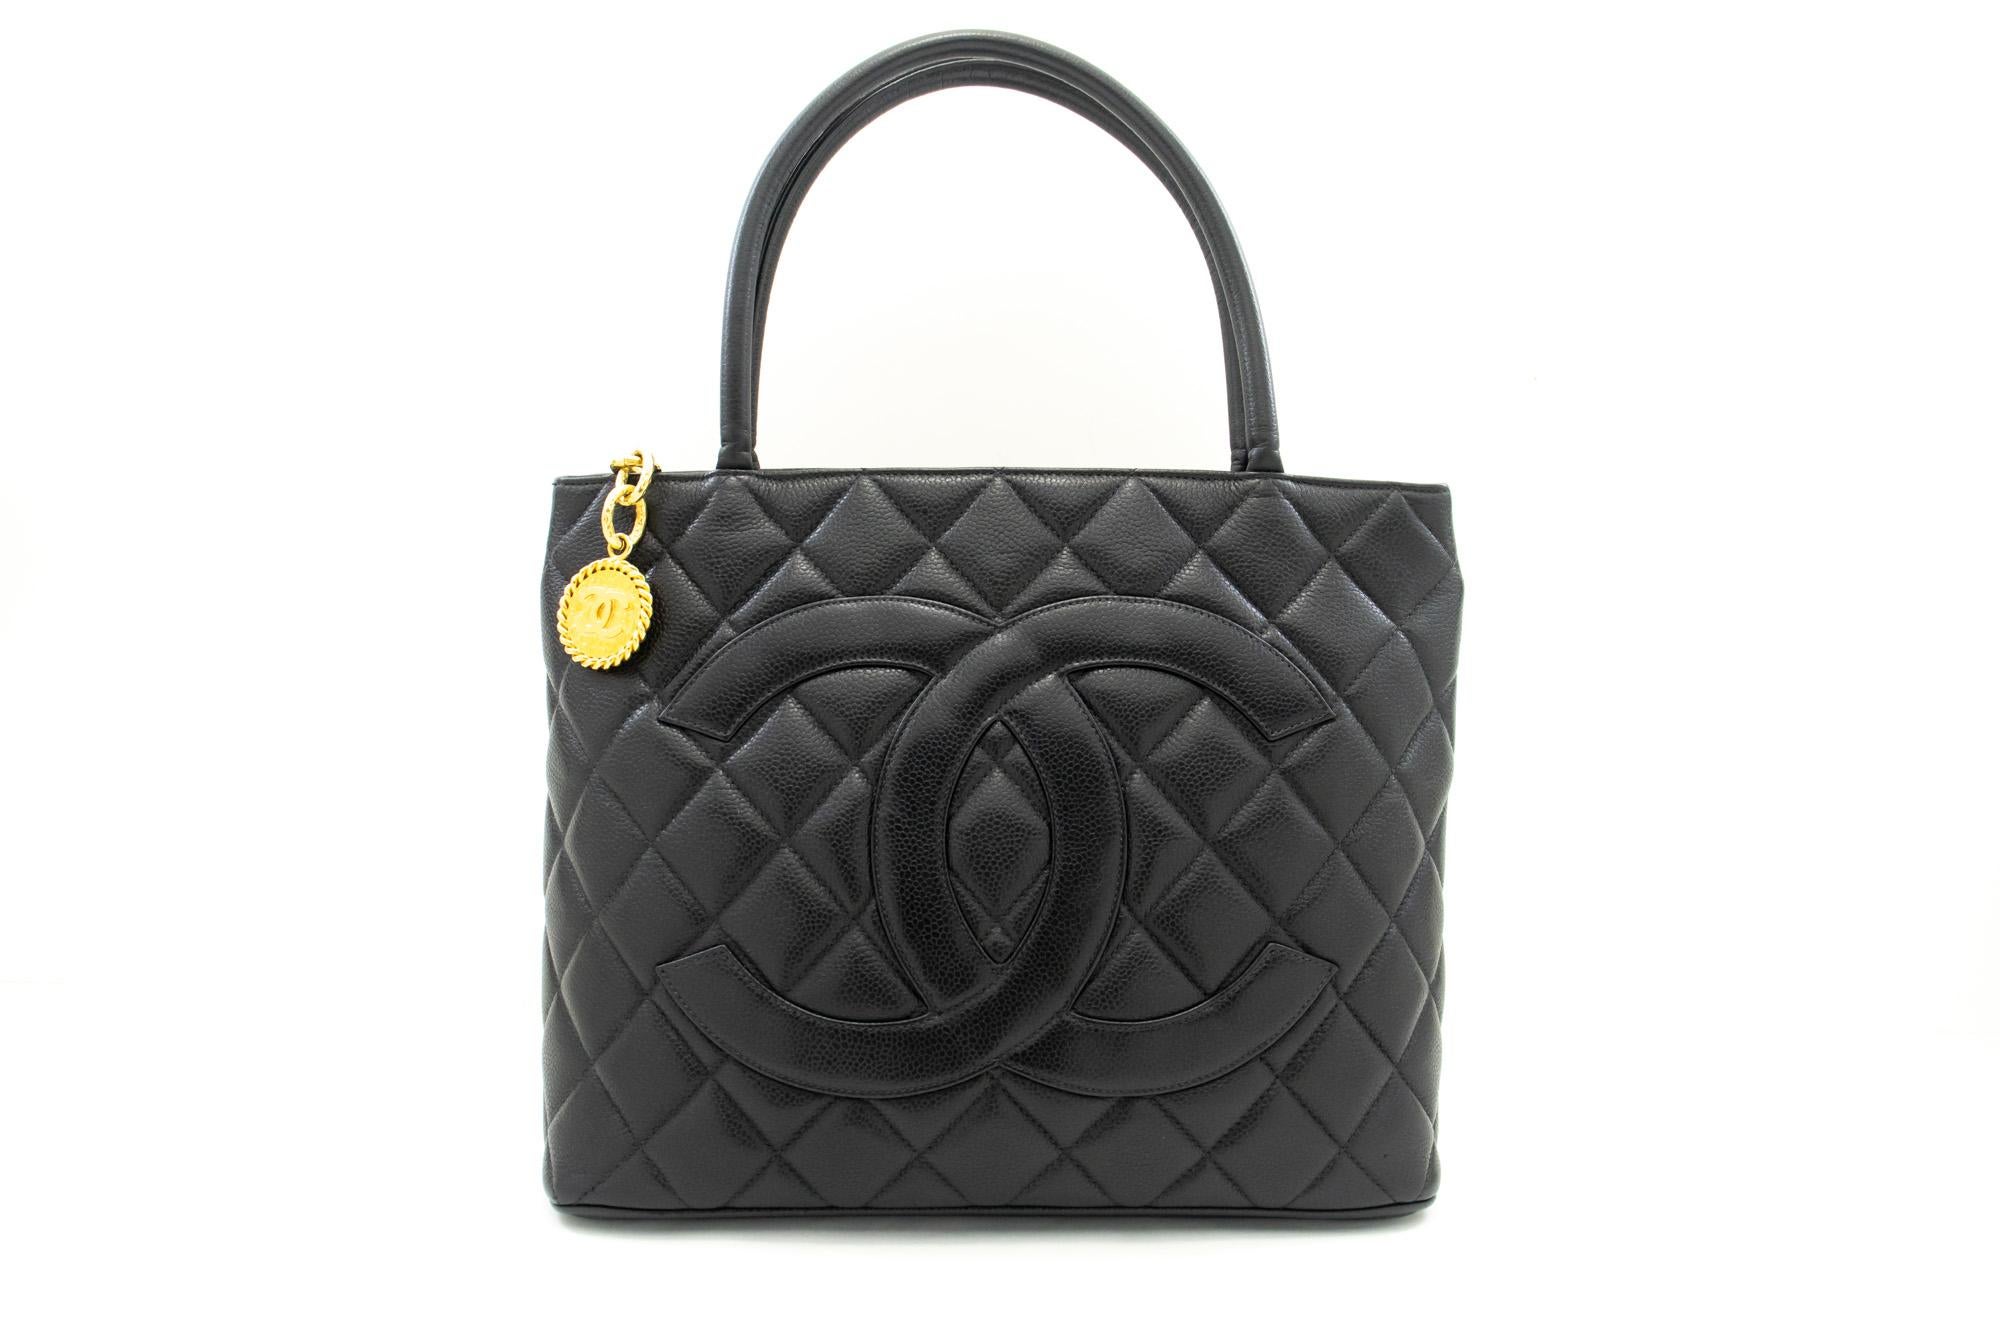 An authentic CHANEL Gold Medallion Caviar Shoulder Bag Grand Shopping Tote. The color is Black. The outside material is Leather. The pattern is Solid. This item is Vintage / Classic. The year of manufacture would be 1996-1997.
Conditions &